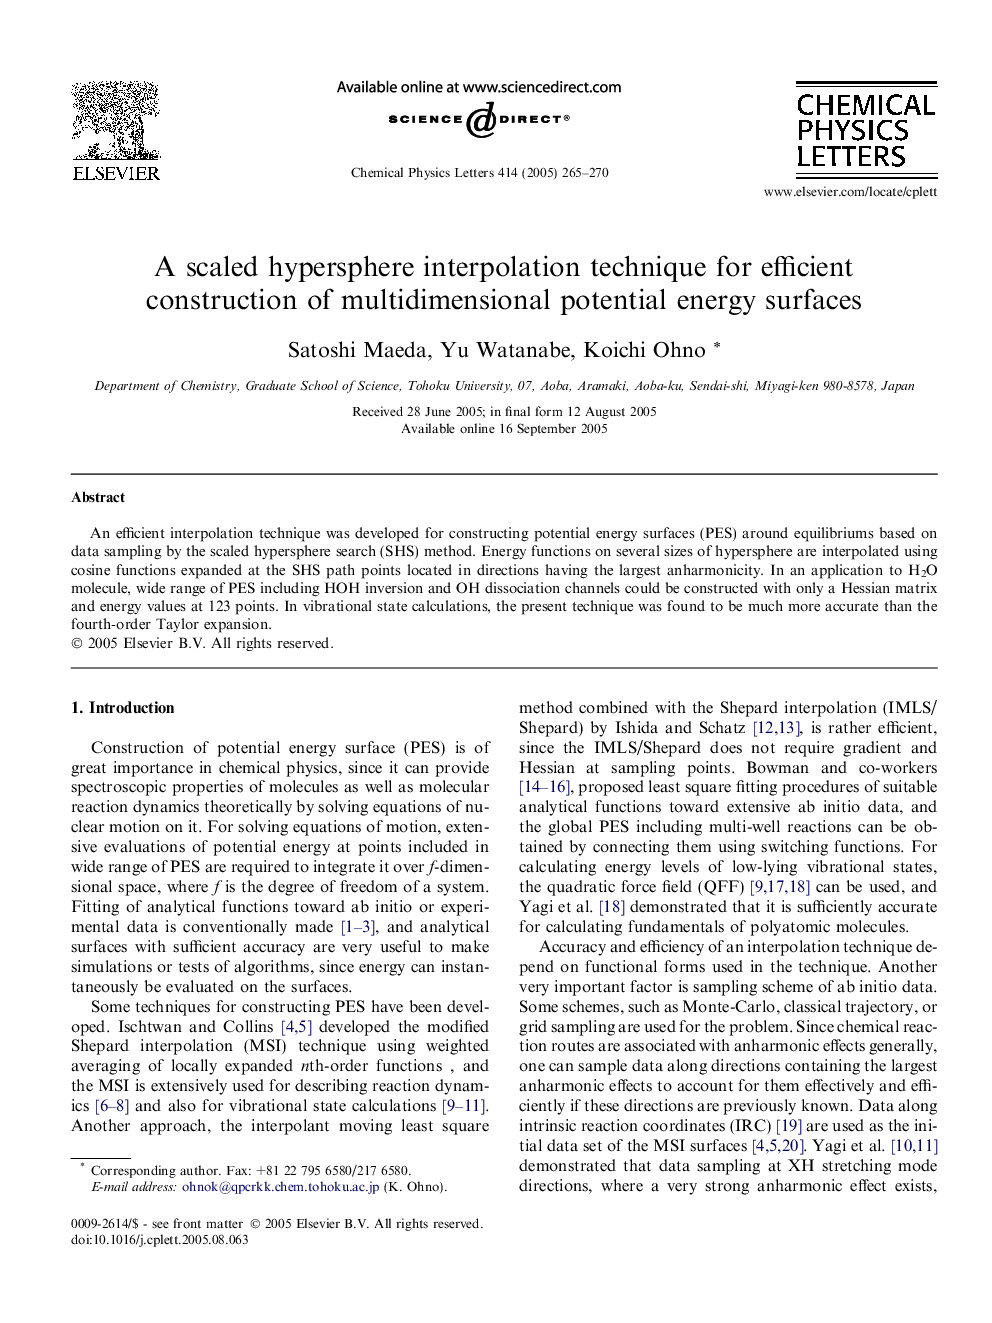 A scaled hypersphere interpolation technique for efficient construction of multidimensional potential energy surfaces